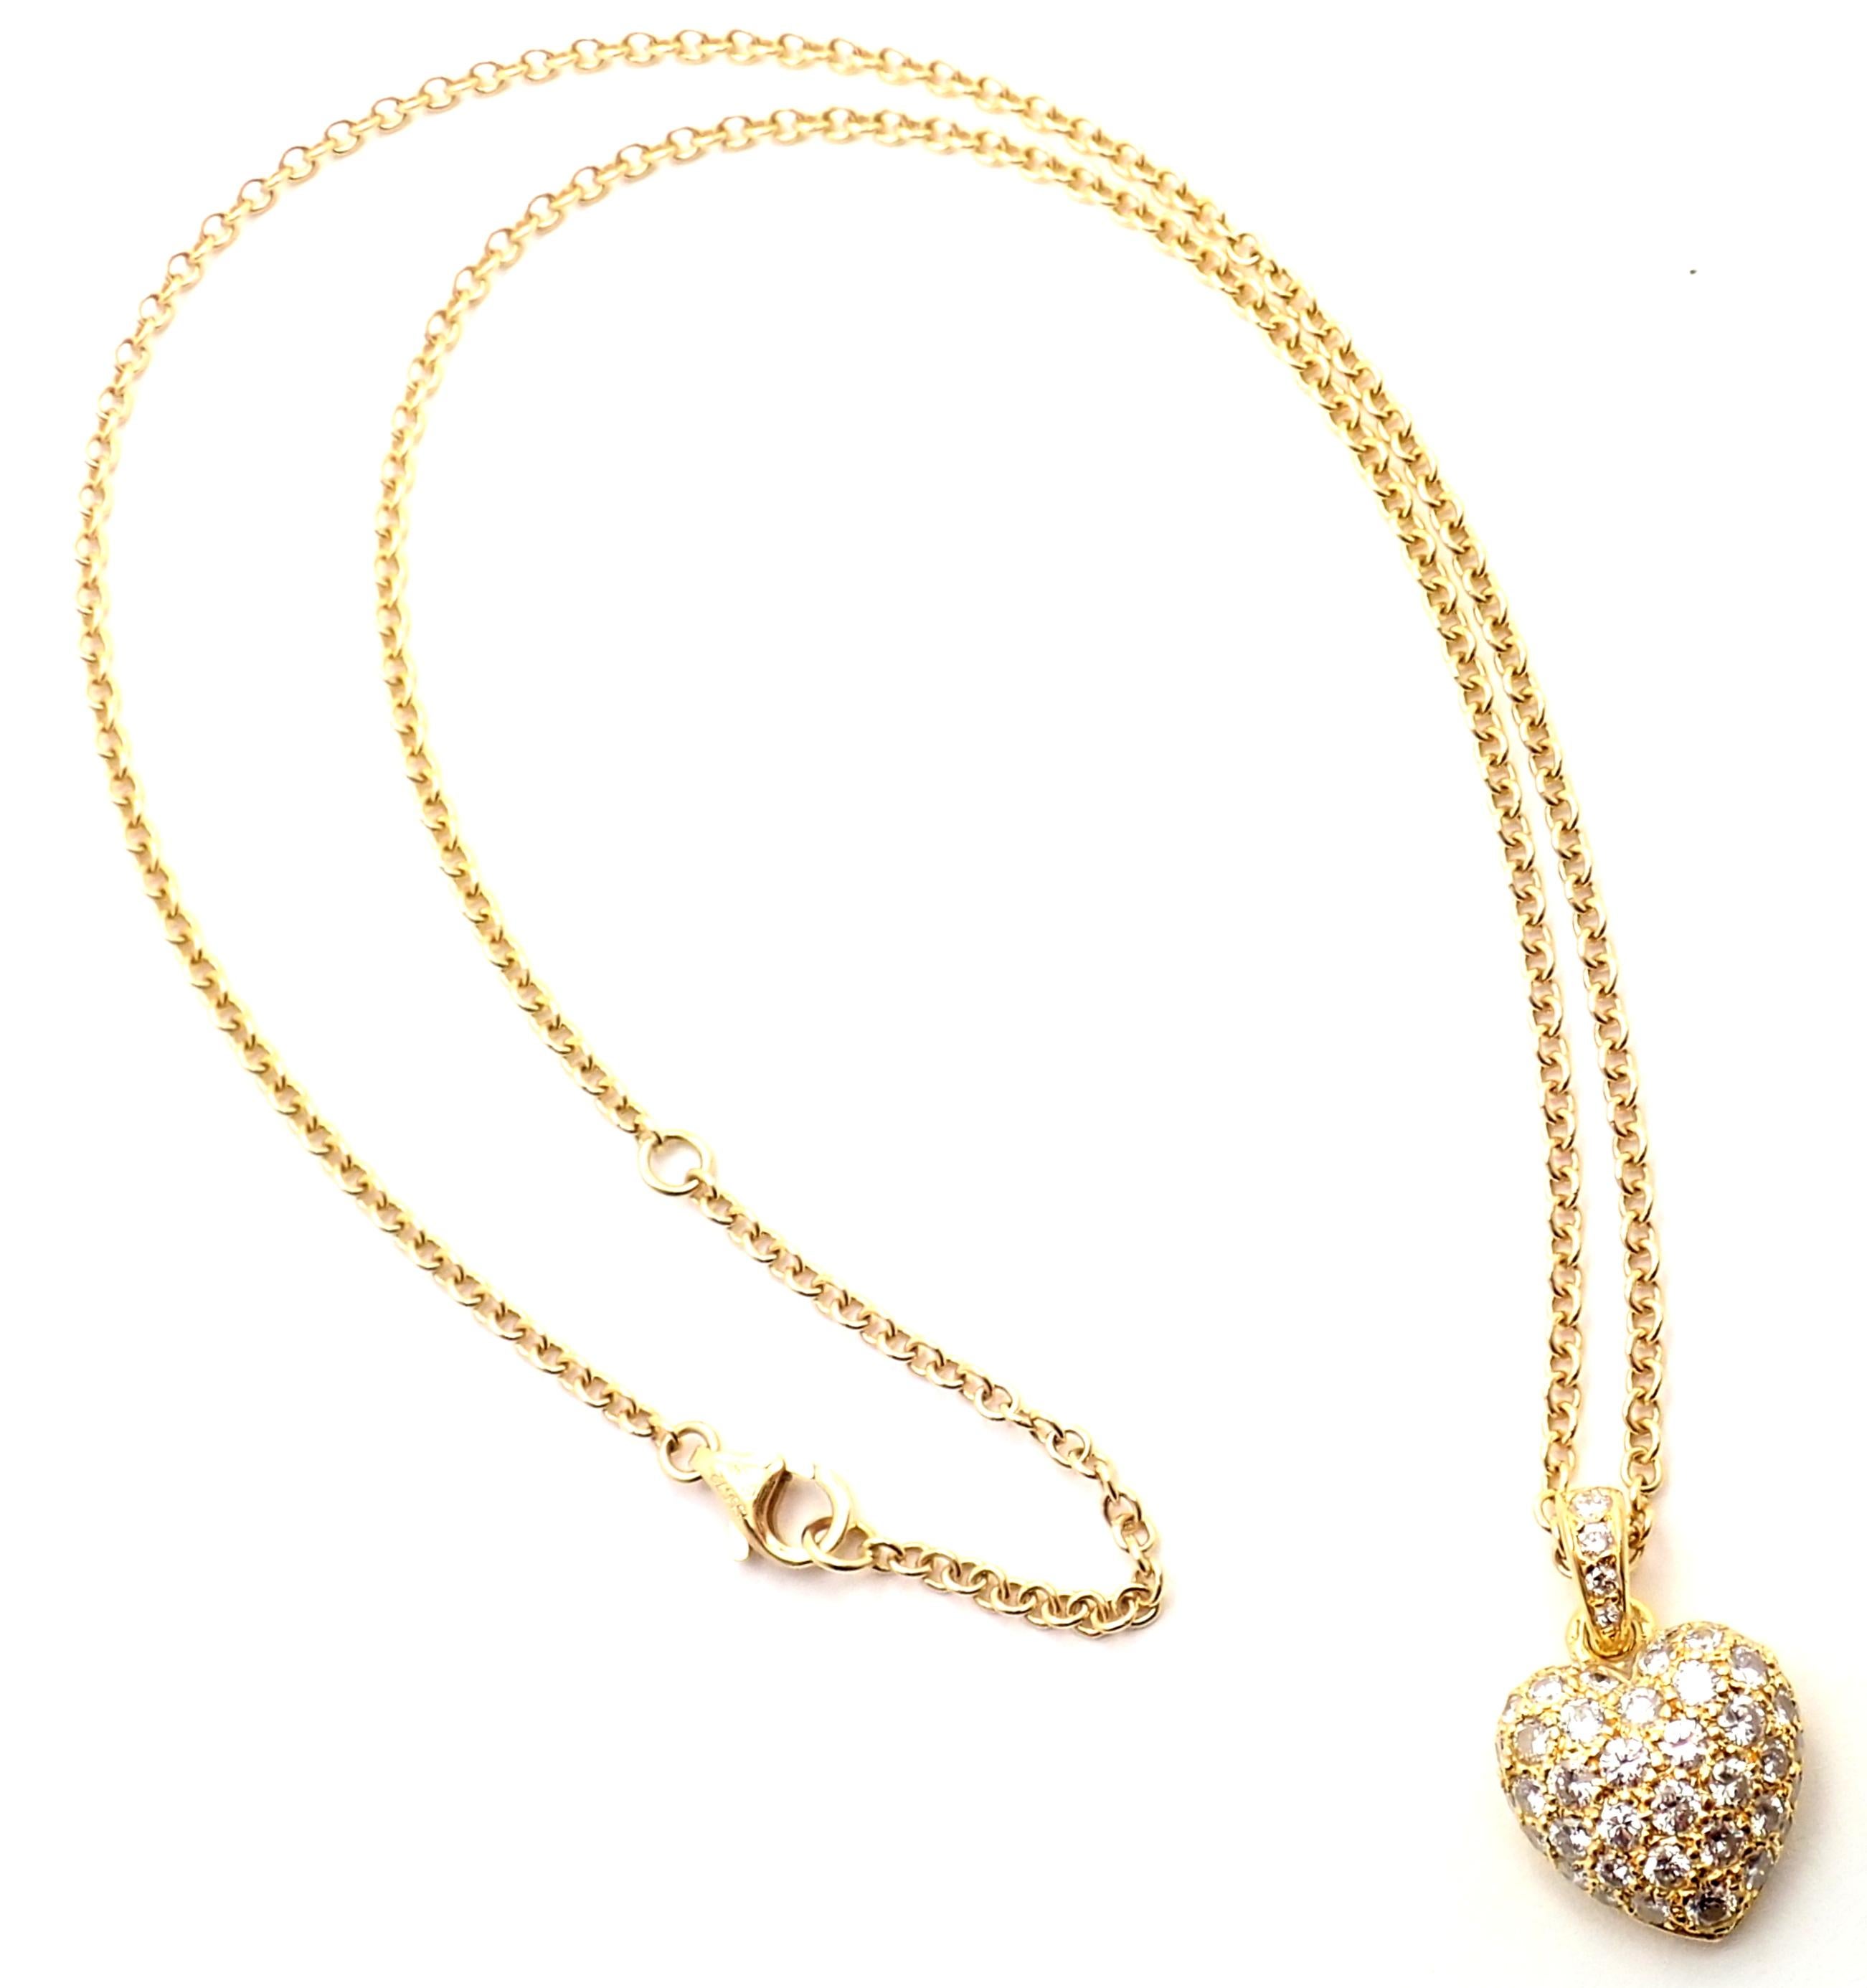 18k Yellow Gold Diamond Pave Heart Pendant Necklace by Cartier.
With Round brilliant cut diamonds VS1 clarity E color total weight approx. 2ct
Details:
Weight: 8.3 grams
Pendant Size: 21mm x 14mm
Width: 2mm
Length: 18